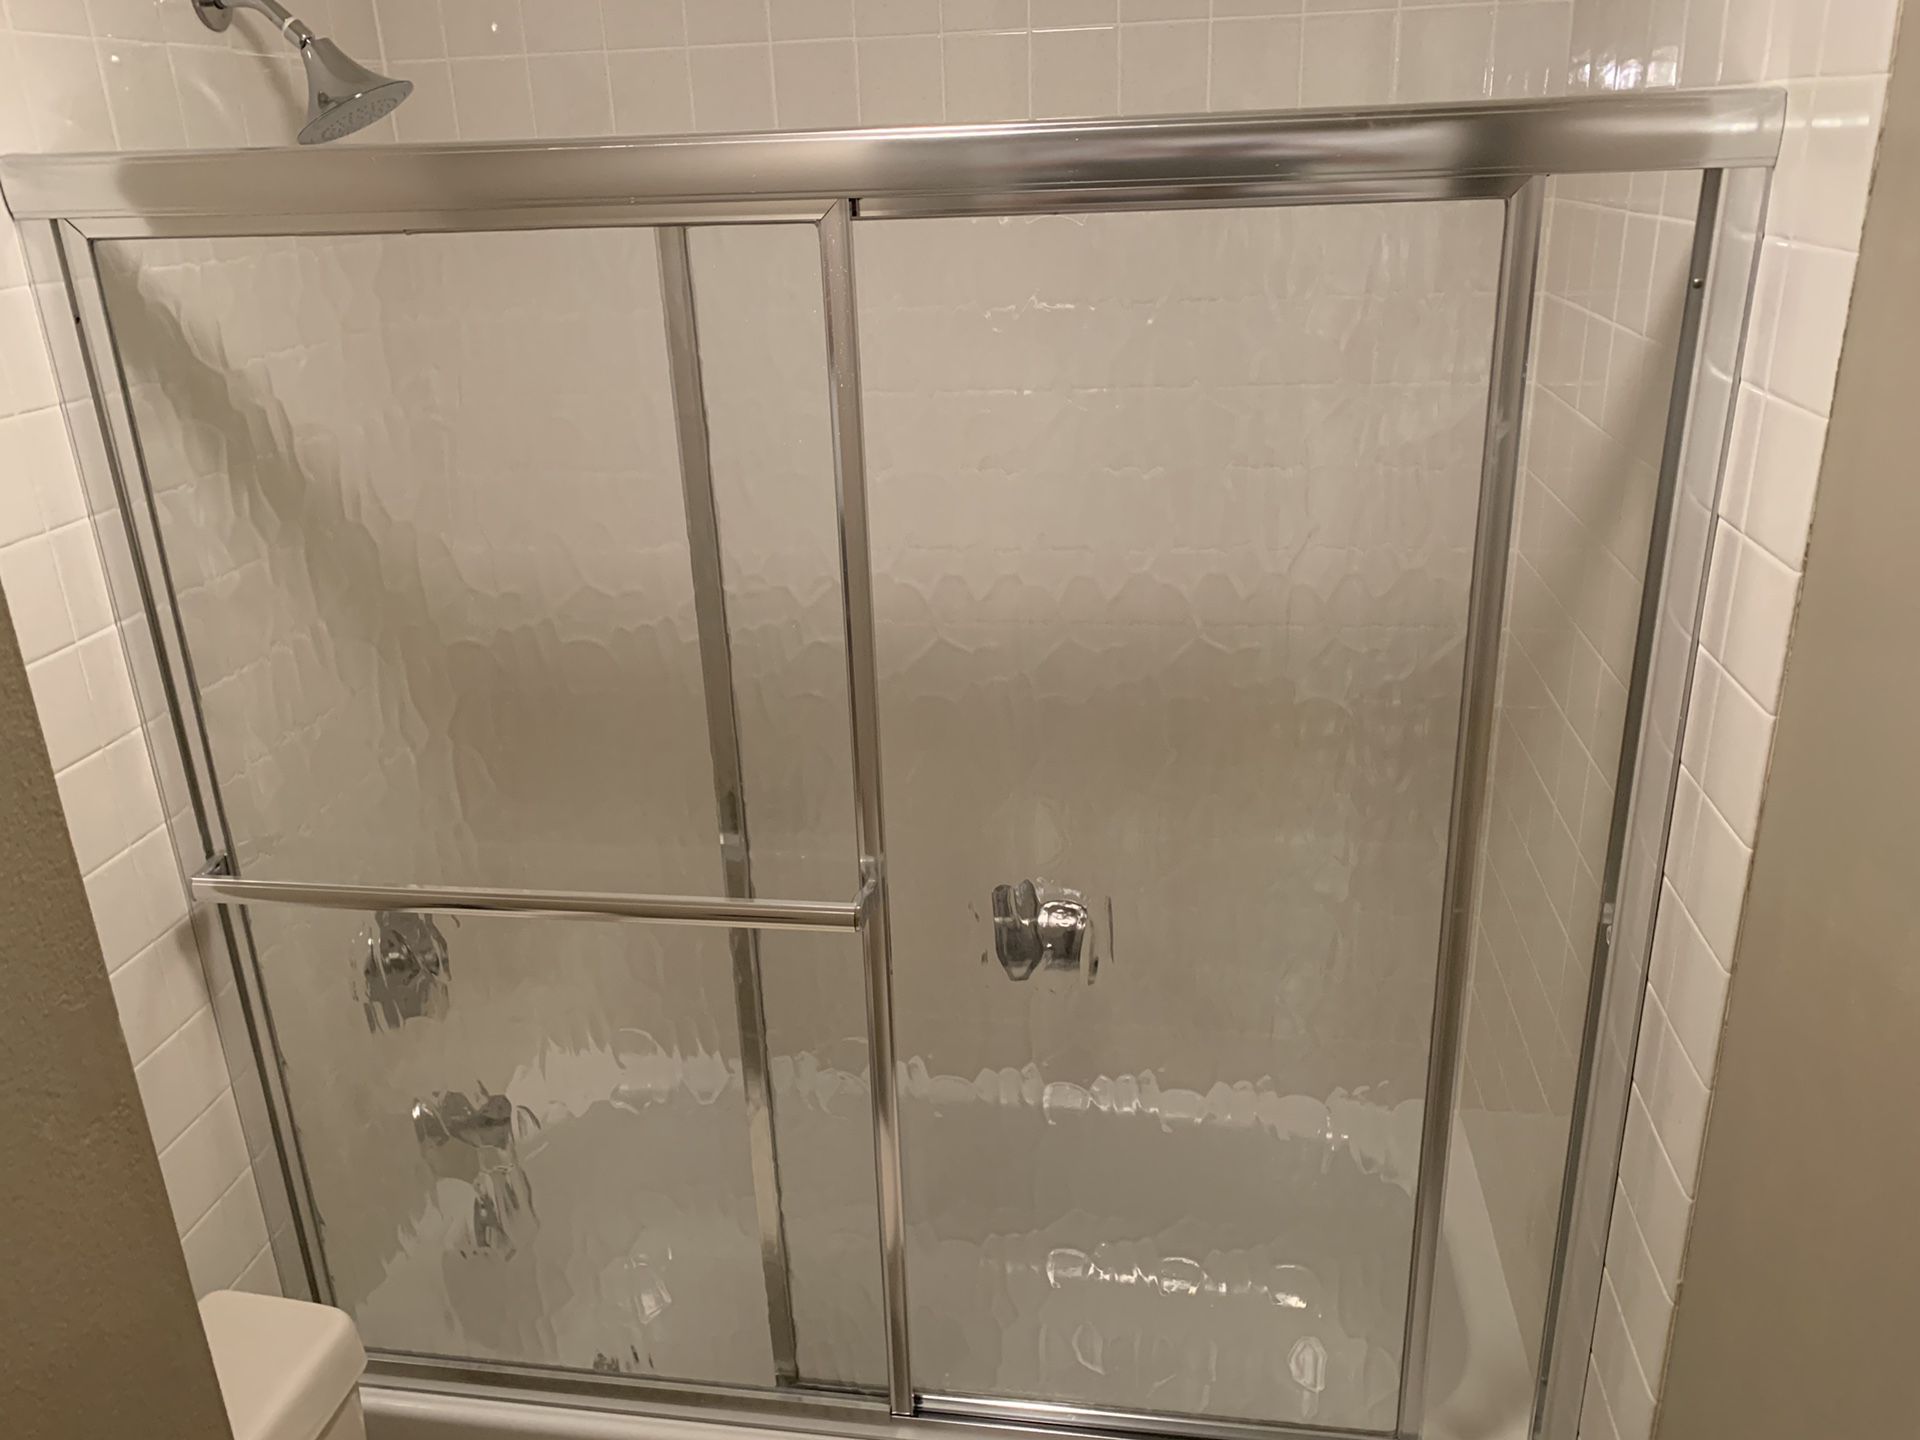 58.5” wide by 55” tall tub shower door